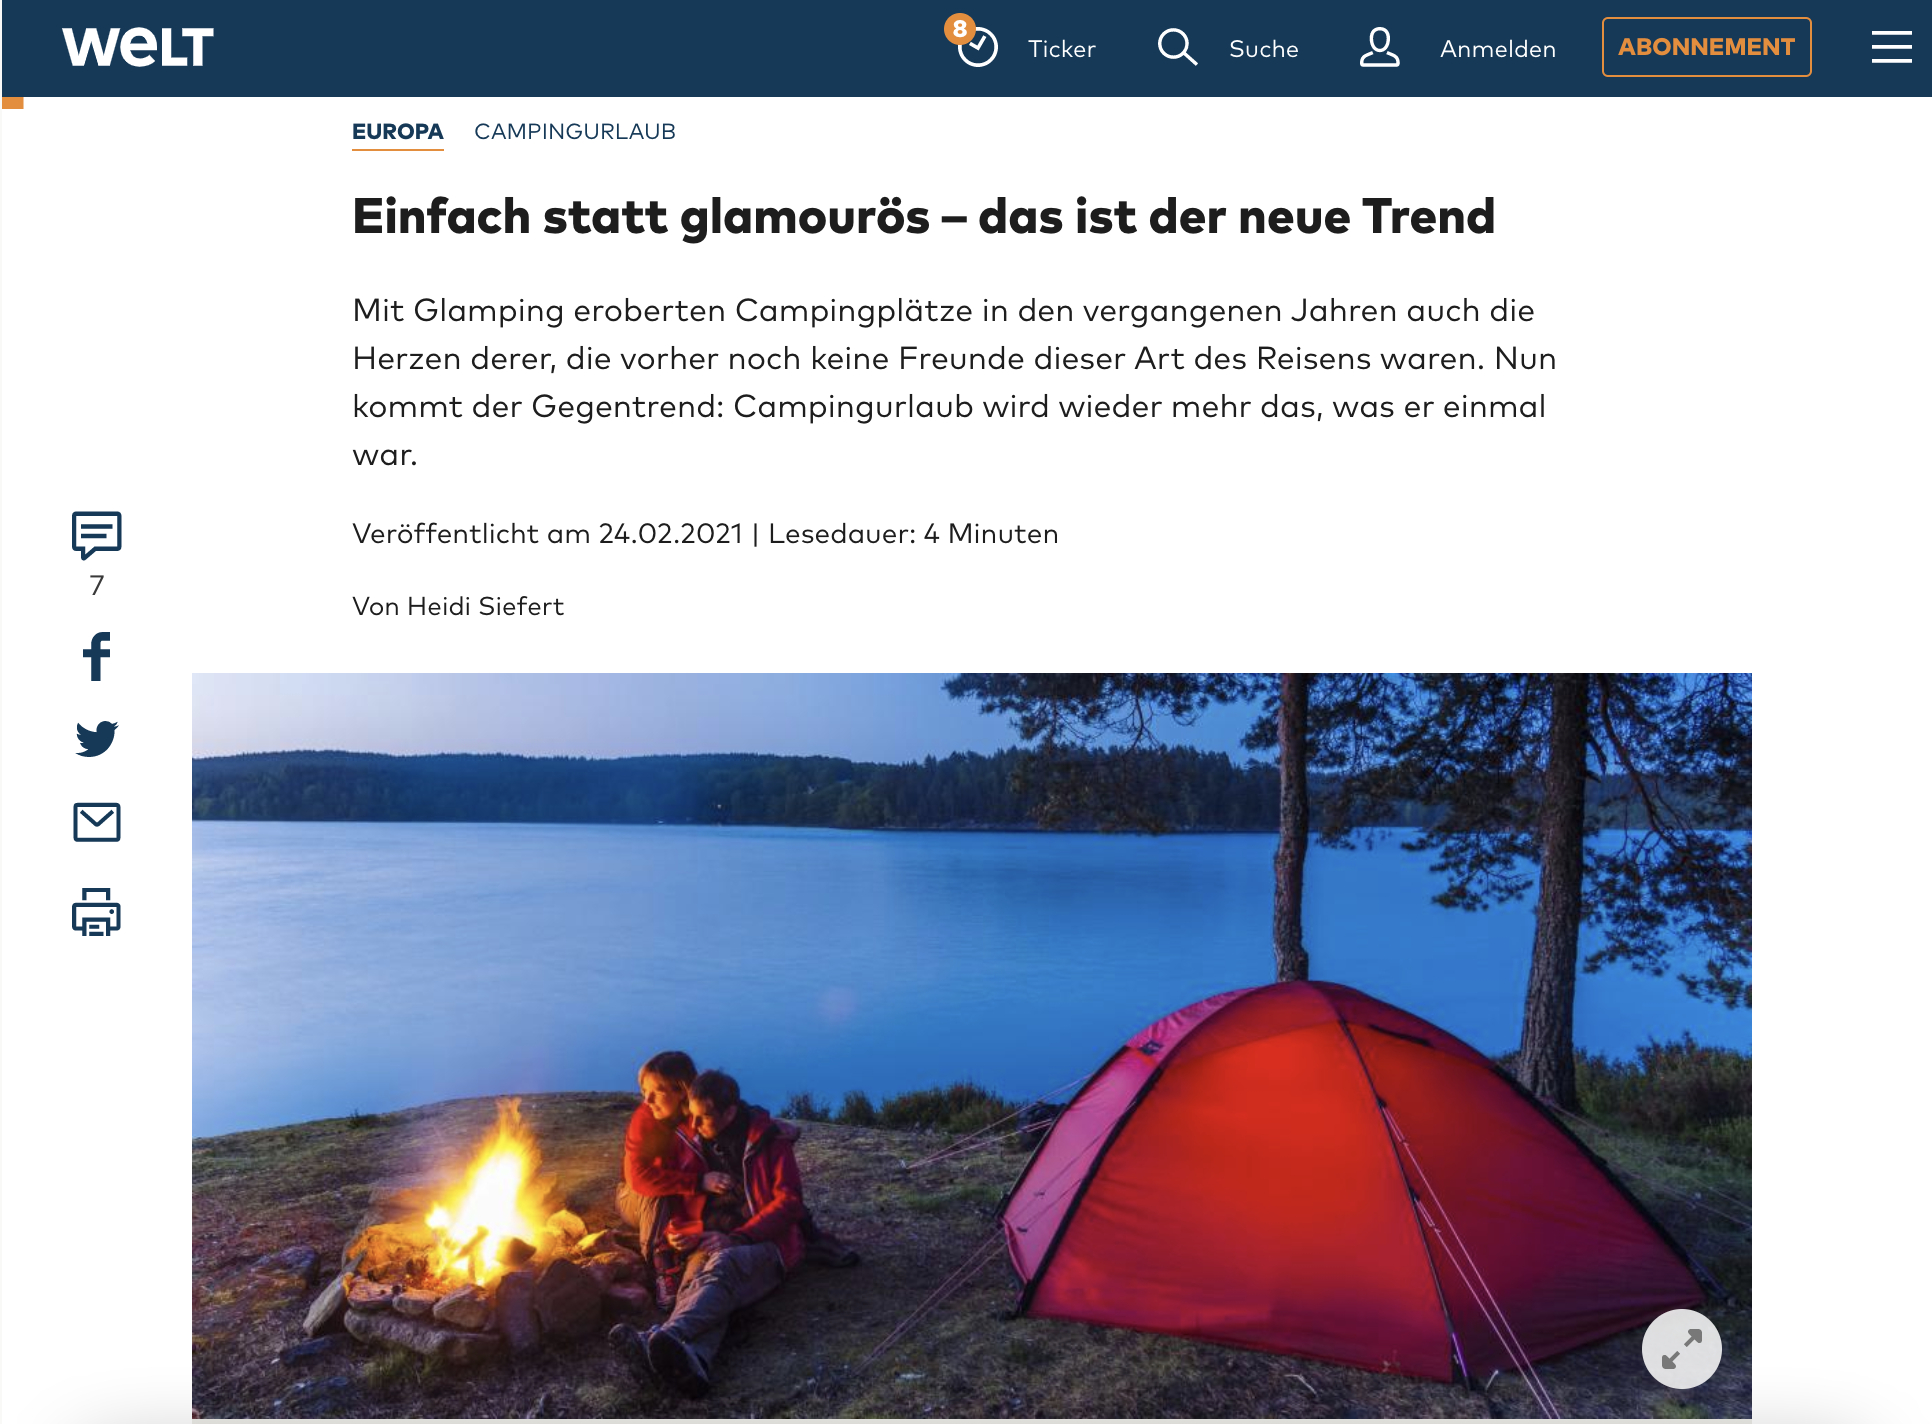 24 Ferbruary, 2021 — Welt about new camping trends